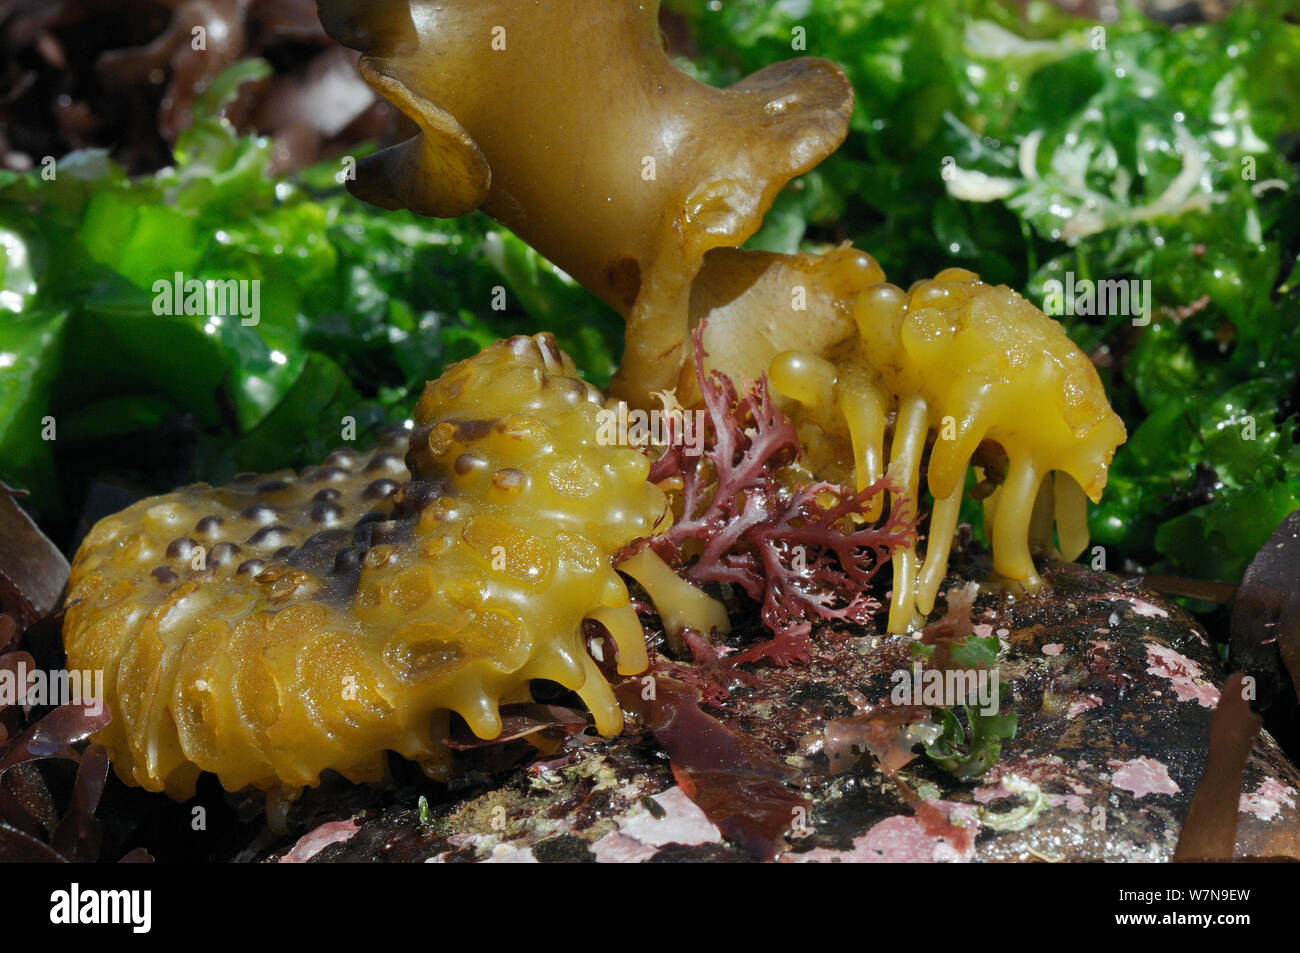 Bulbous holdfast of Furbellows (Saccorhiza polyschides), a large kelp, attached to a boulder low on a rocky shore alongside Sea lettuce (Ulva lactuca) and red algae, near Falmouth, Cornwall, UK, August. Stock Photo